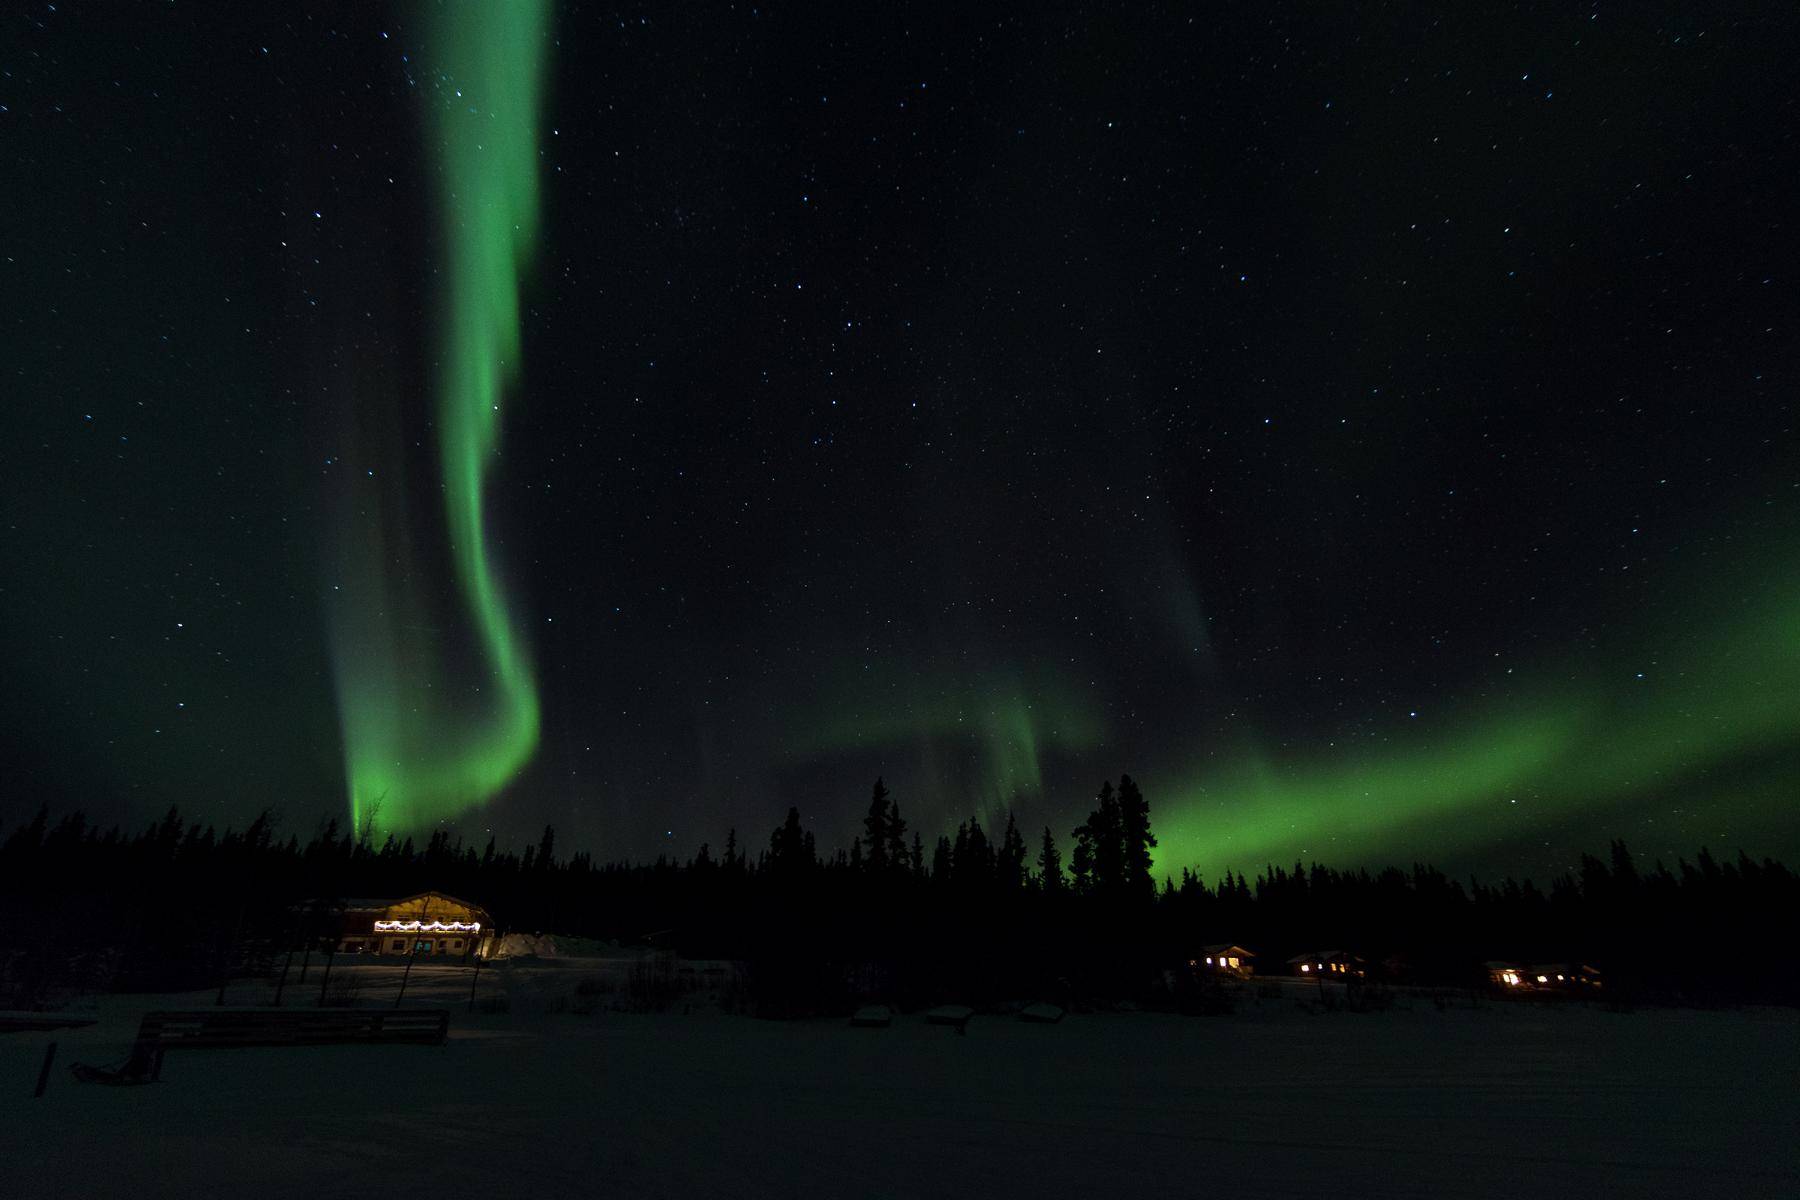  northern lights at night over lit cabins